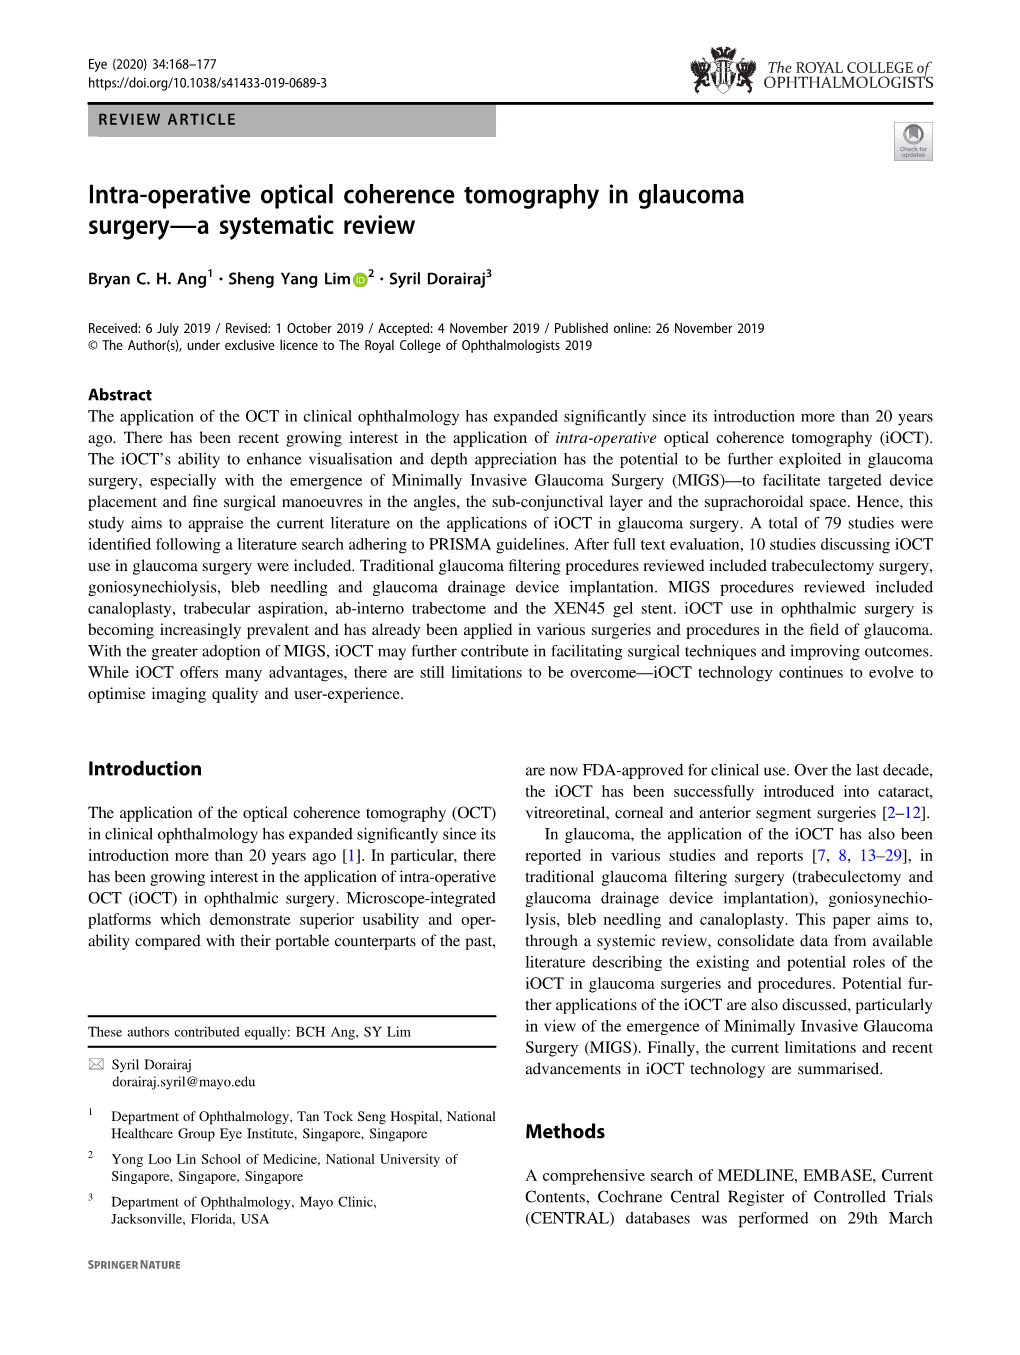 Intra-Operative Optical Coherence Tomography in Glaucoma Surgery—A Systematic Review